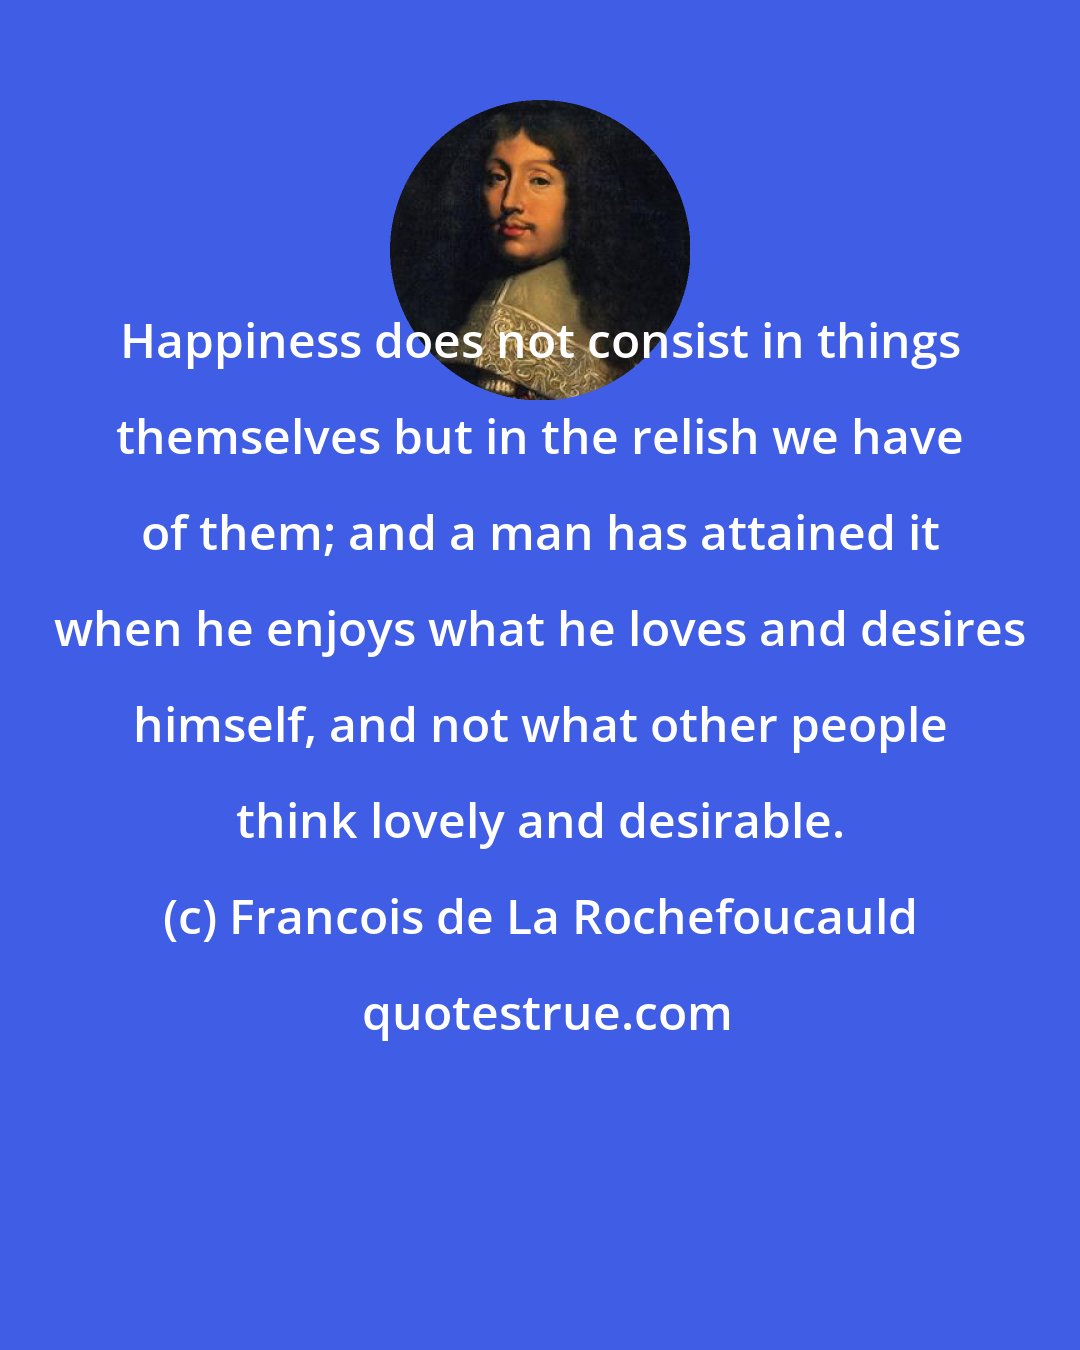 Francois de La Rochefoucauld: Happiness does not consist in things themselves but in the relish we have of them; and a man has attained it when he enjoys what he loves and desires himself, and not what other people think lovely and desirable.